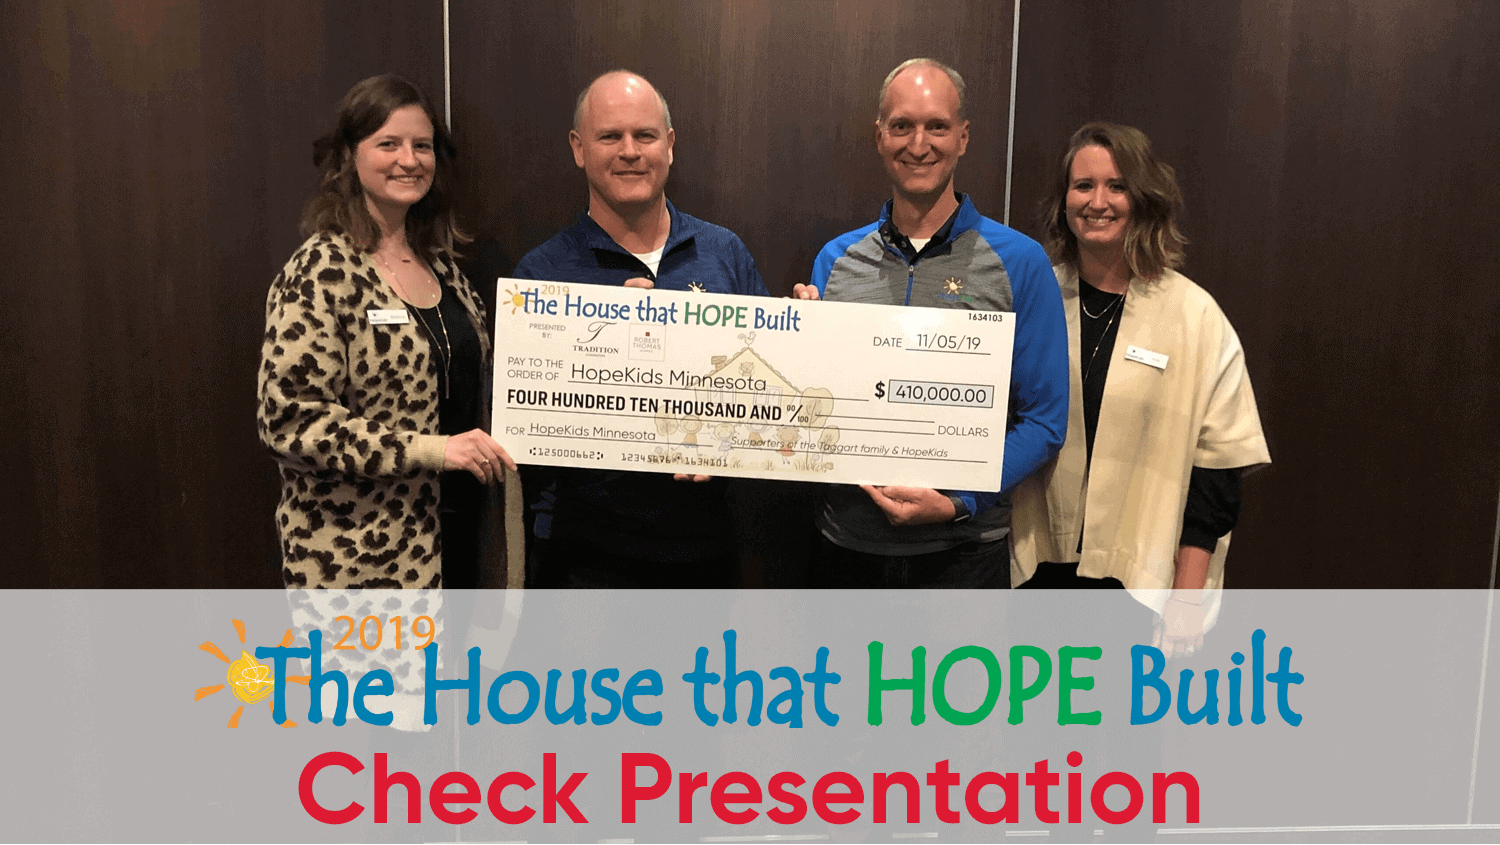 The House that Hope Built Check Presentation 2019